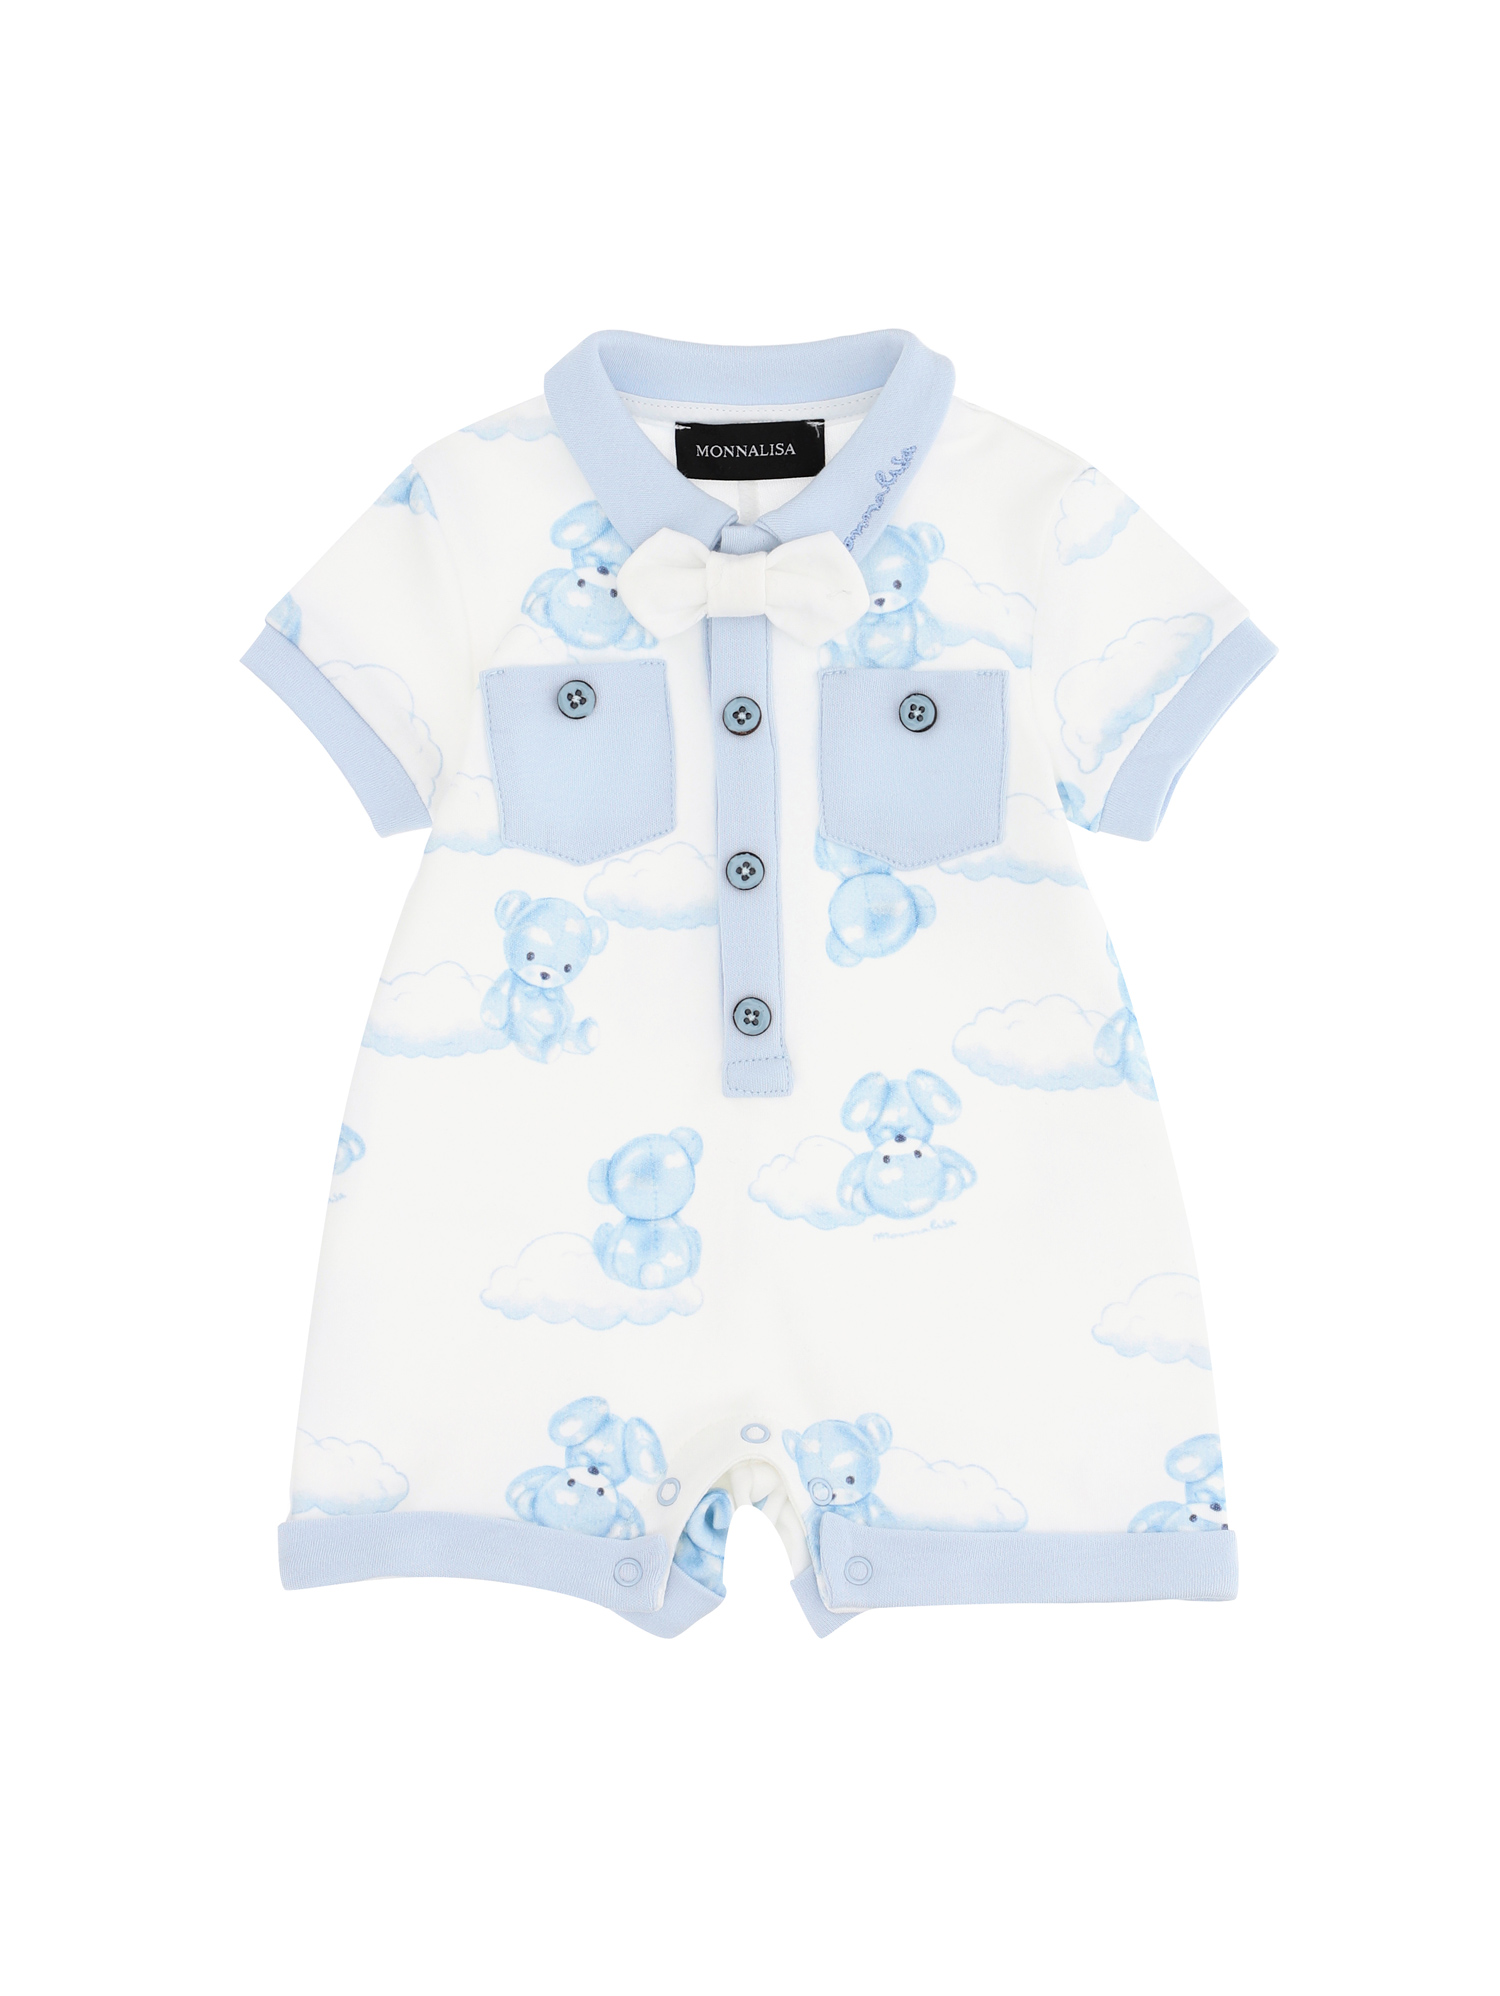 Cotton playsuit with bow tie Monnalisa Girls Clothing Playsuits 